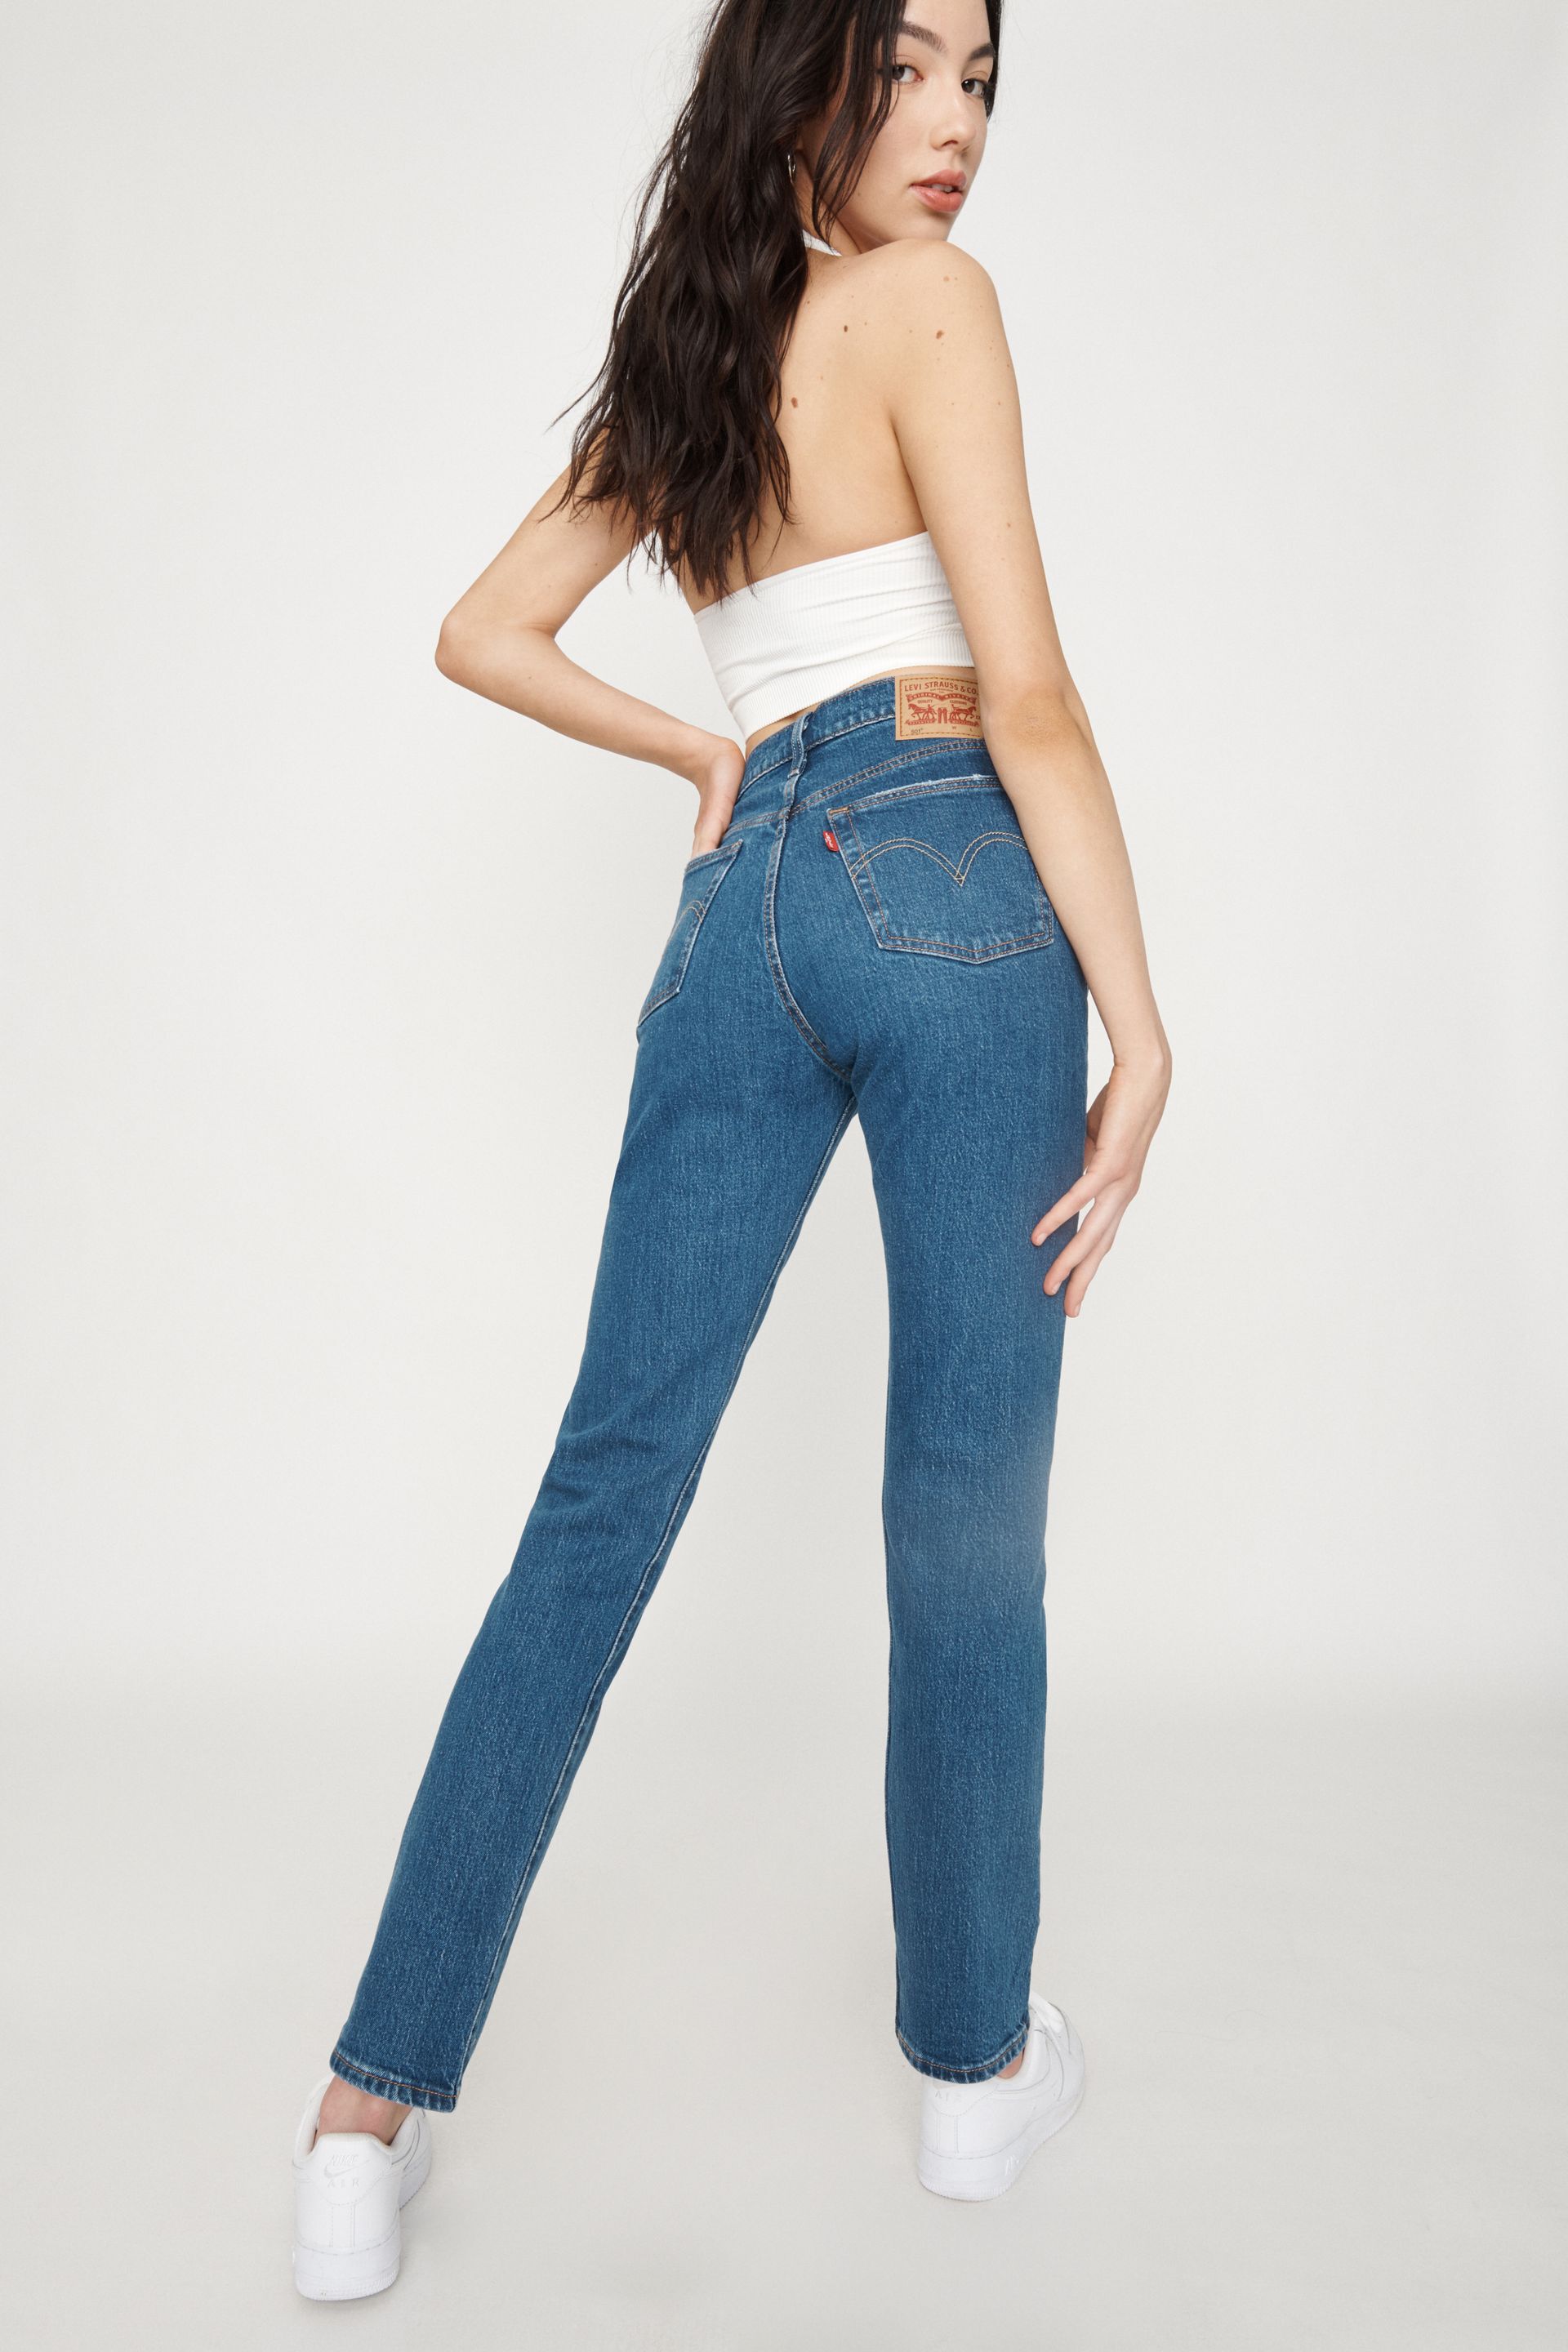 Levi's® Women's 501® Original Cropped Jeans - Must Be Mine